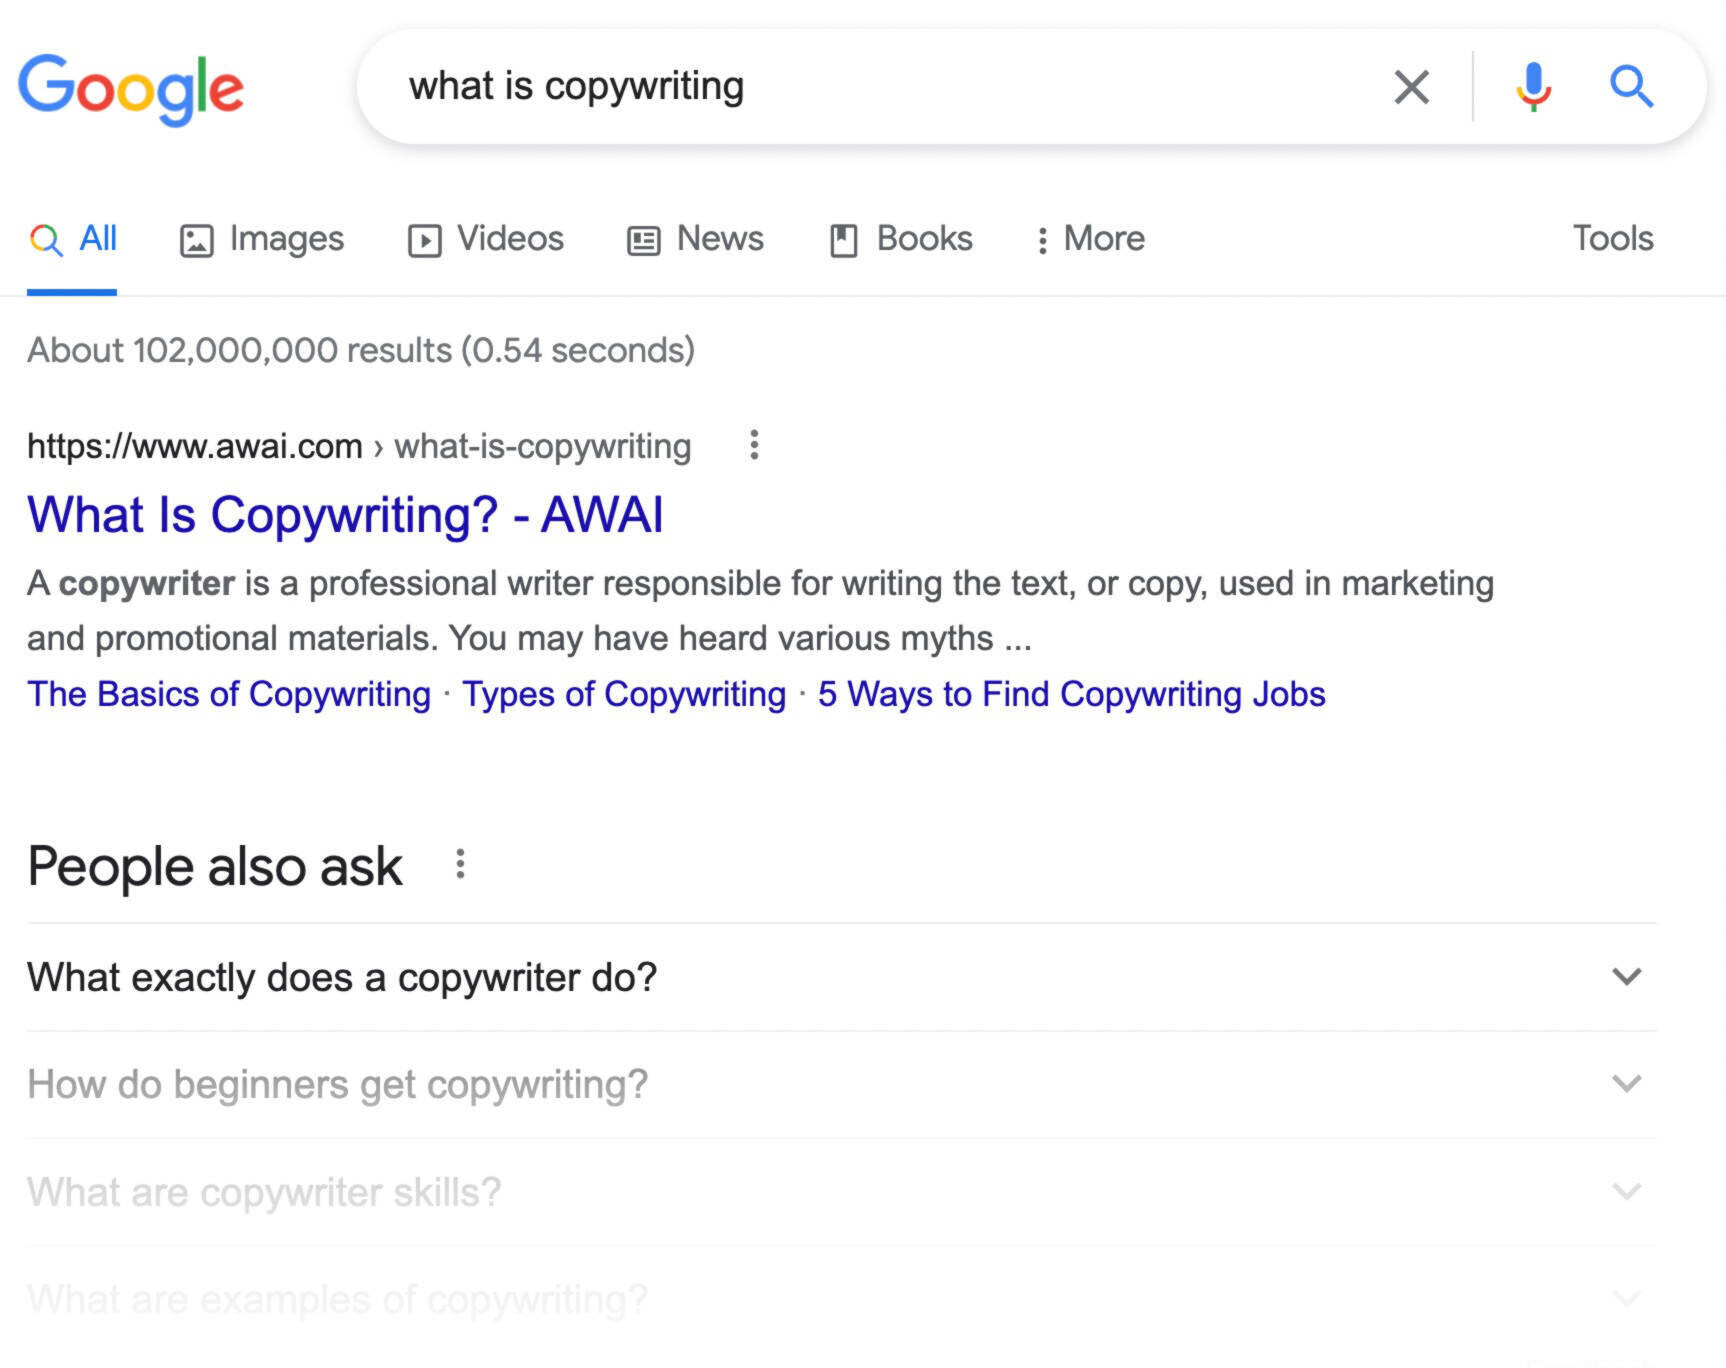 search results for "what is copywriting"